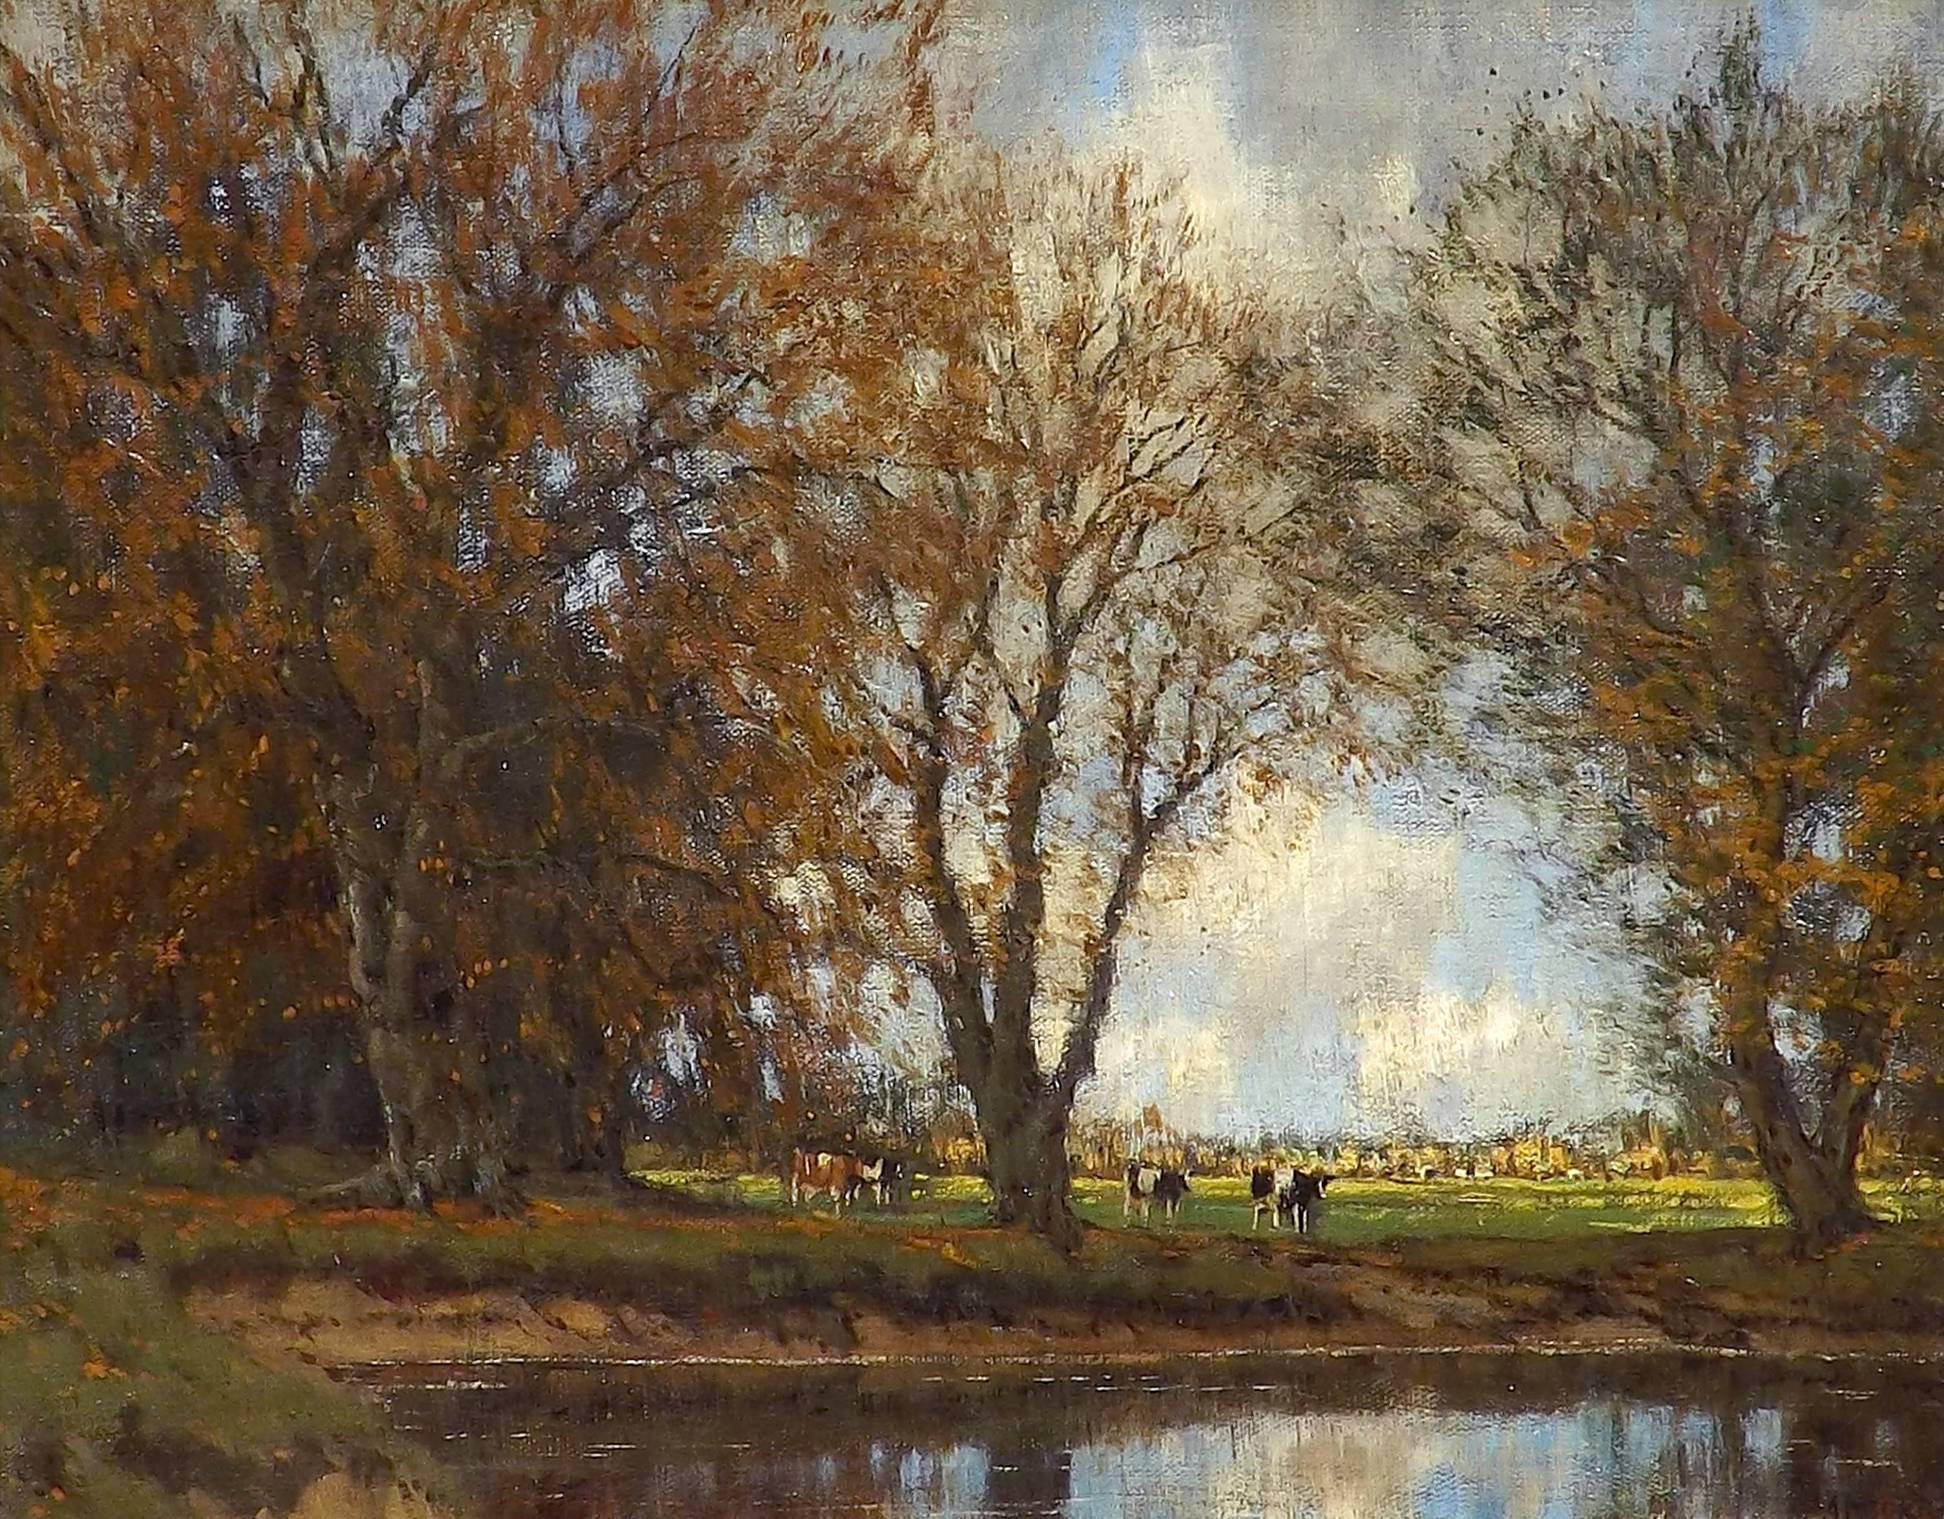 Excellent example of Arnold Marc Gorter's painting of the Achterhoek region of the Netherlands. This atmospheric oil on canvas leaves no question to the recognizable Dutch landscape.

Leading landscape painter who drew inspiration for his work